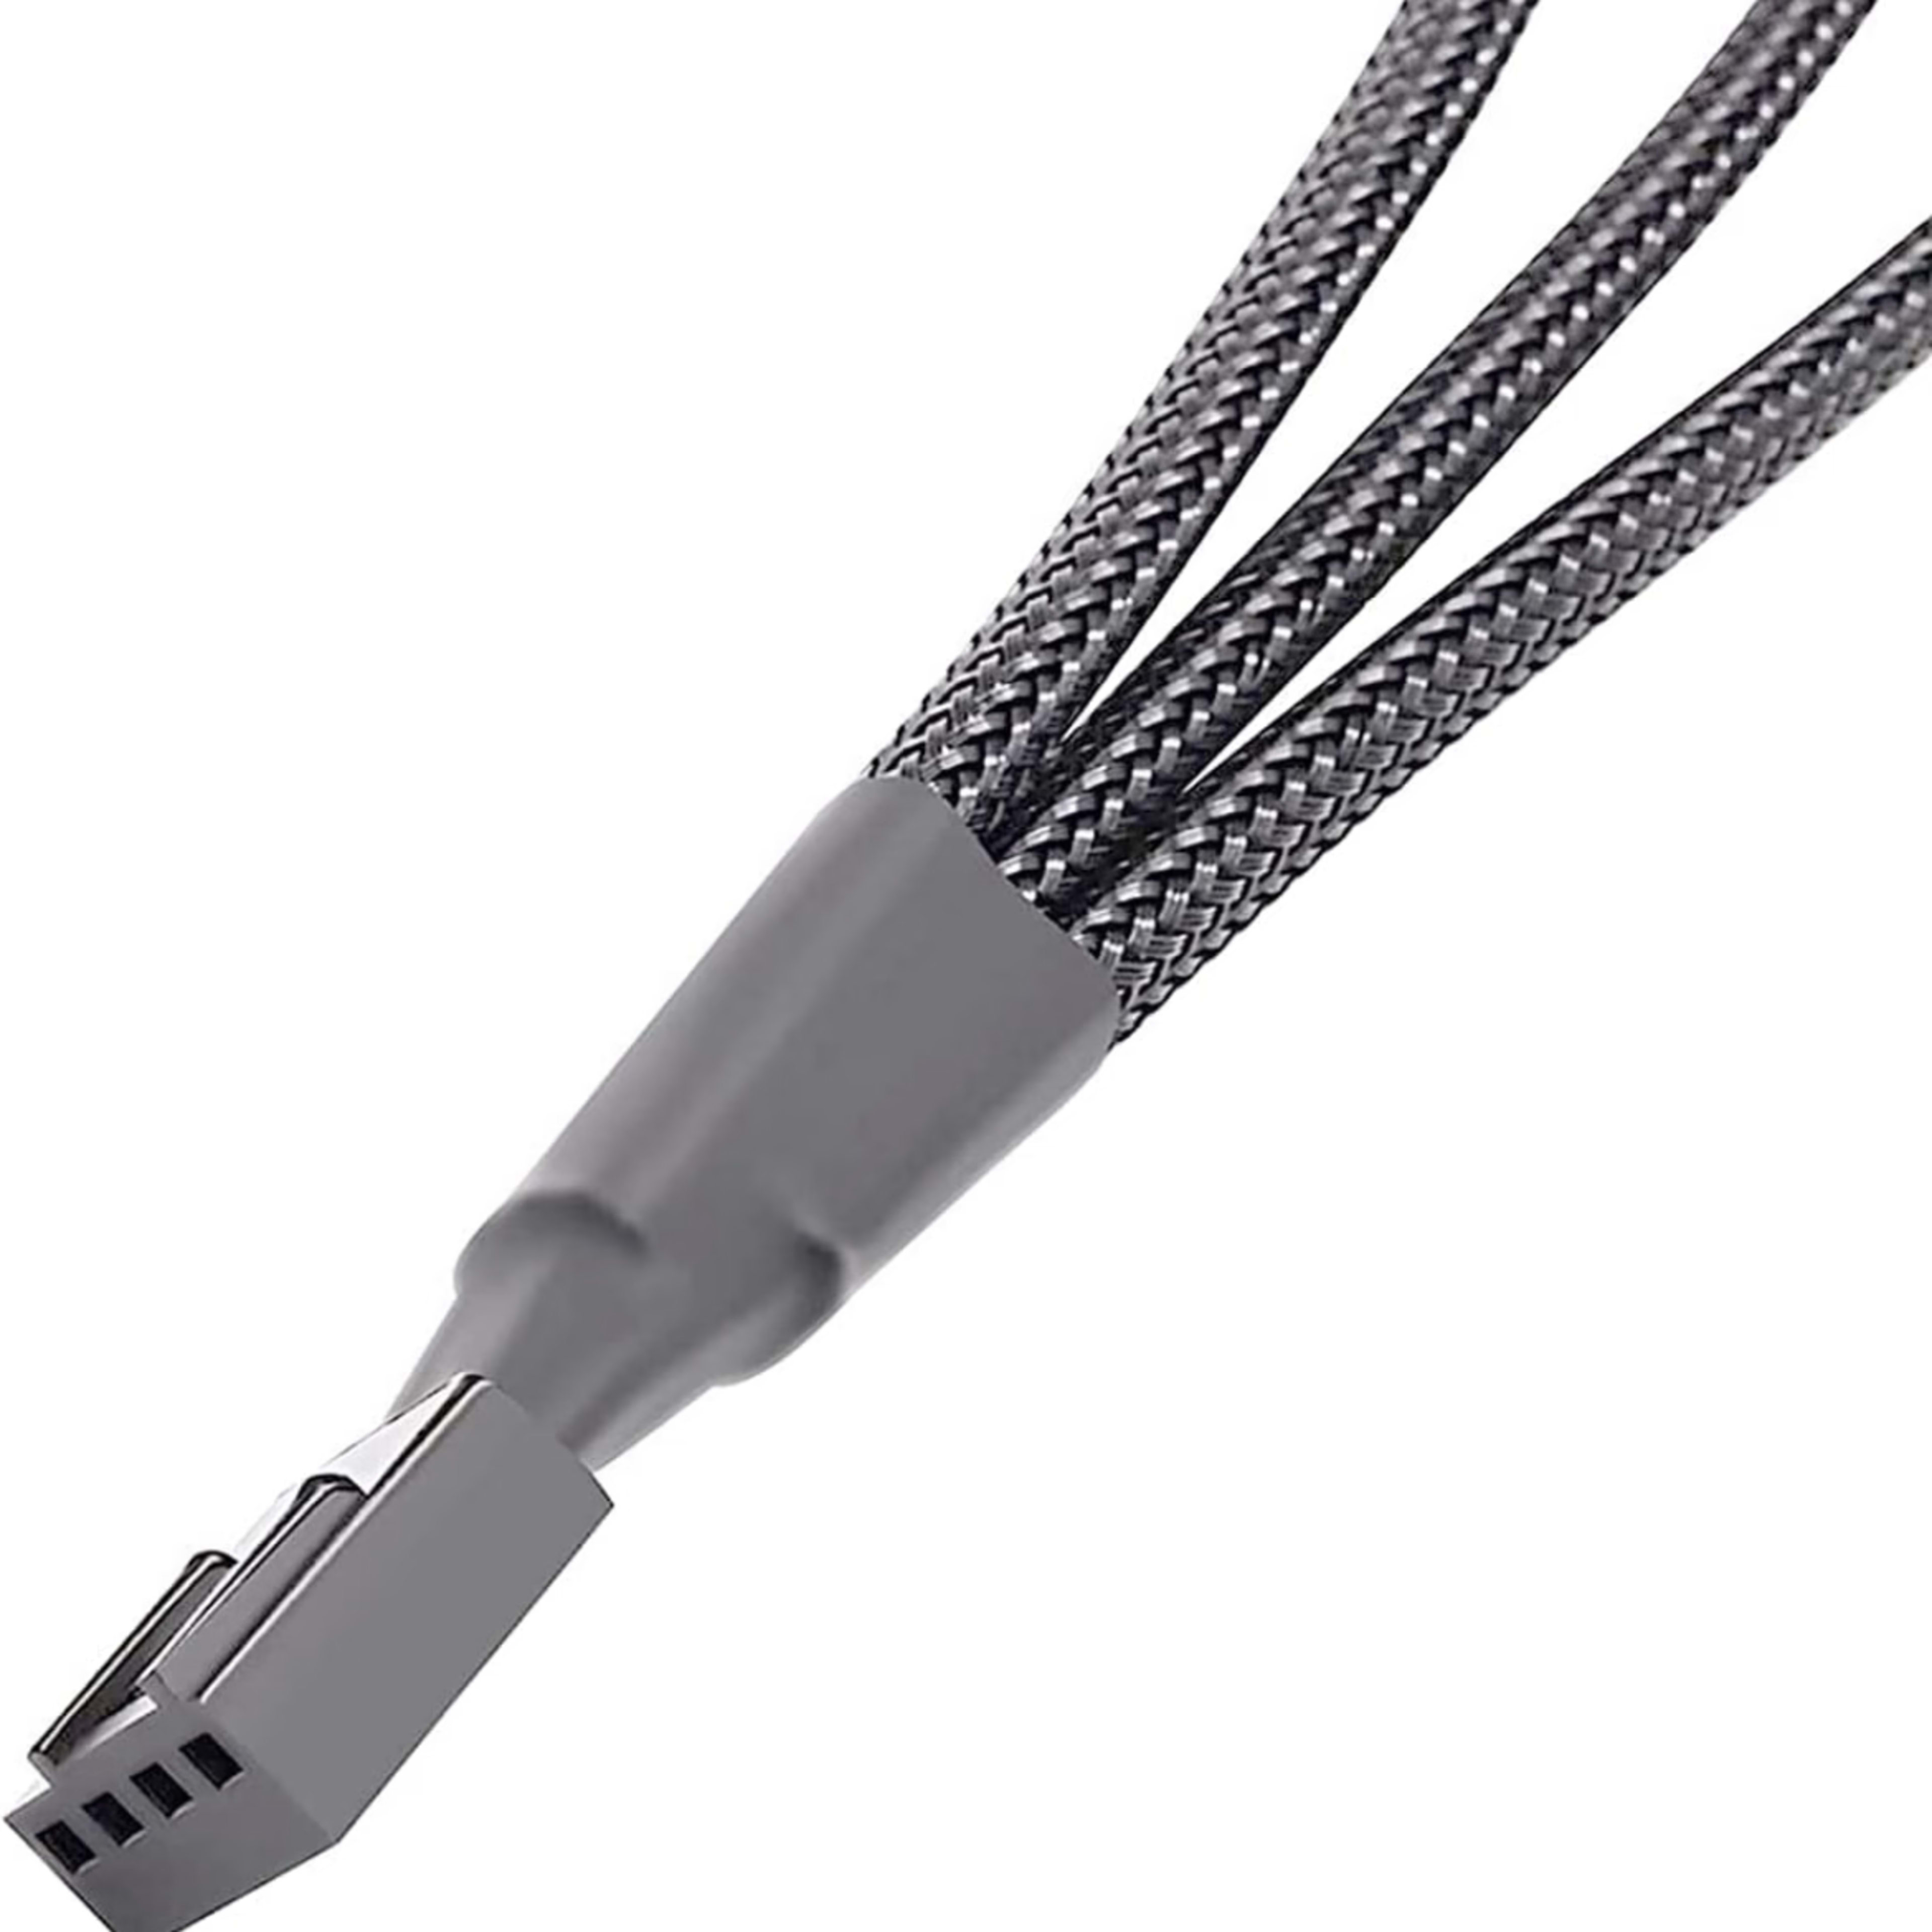 Cable Splitters